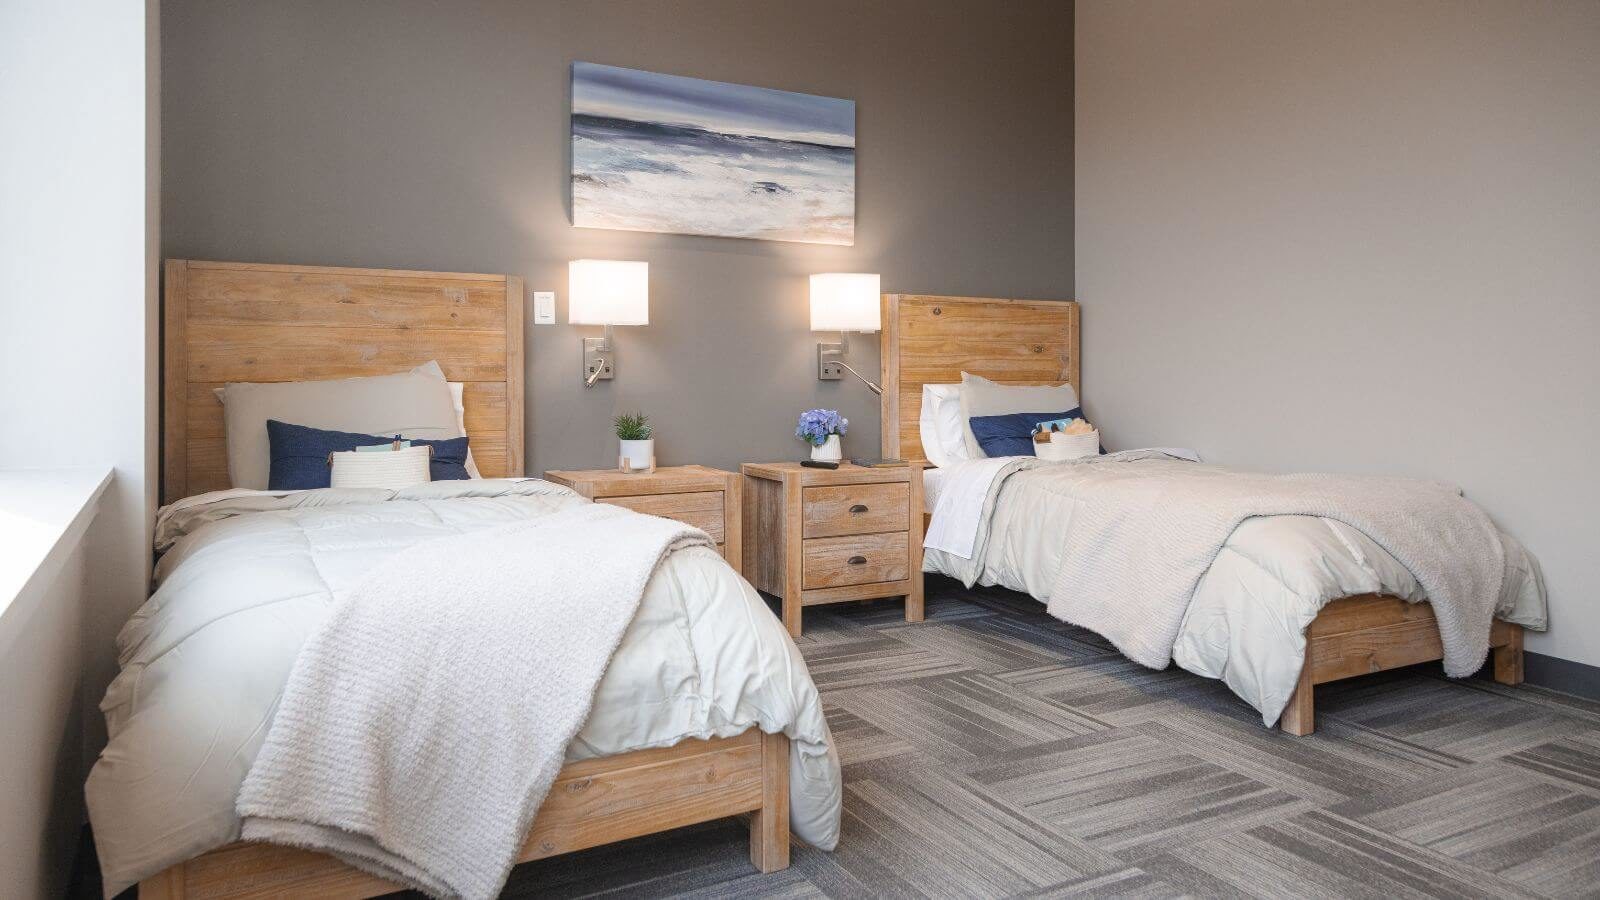 Sandstone Care Virginia Detox Center bedroom area with two beautiful bed with wooden frames